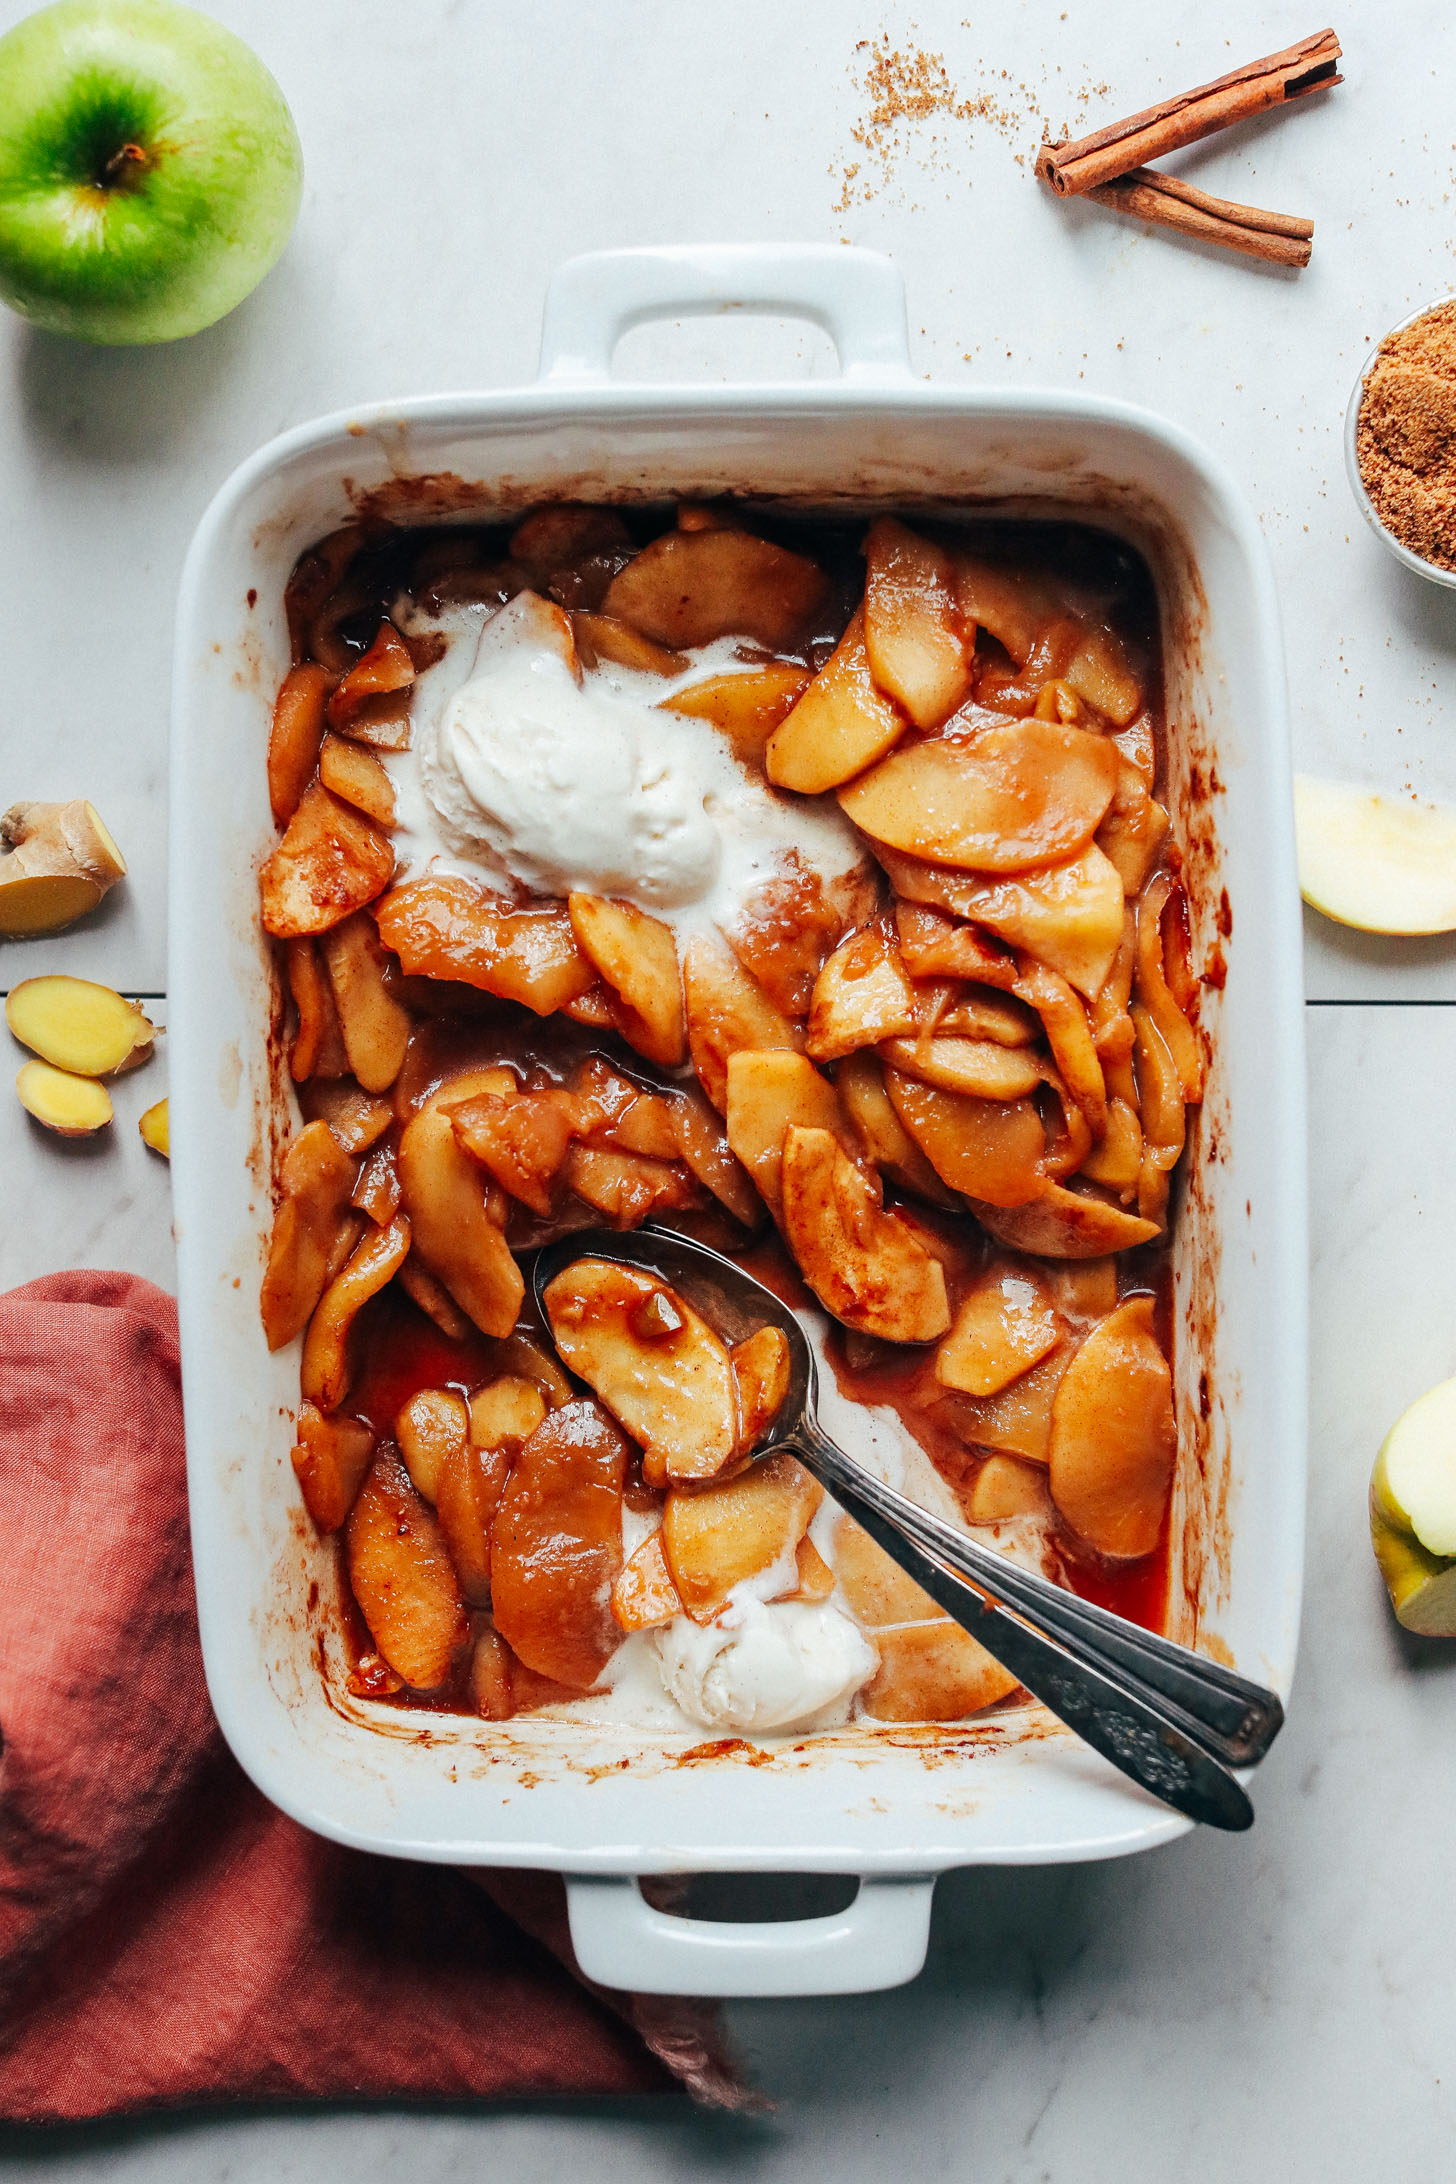 Delicious Cinnamon Baked Apples in a ceramic baking dish with scoops of vegan ice cream